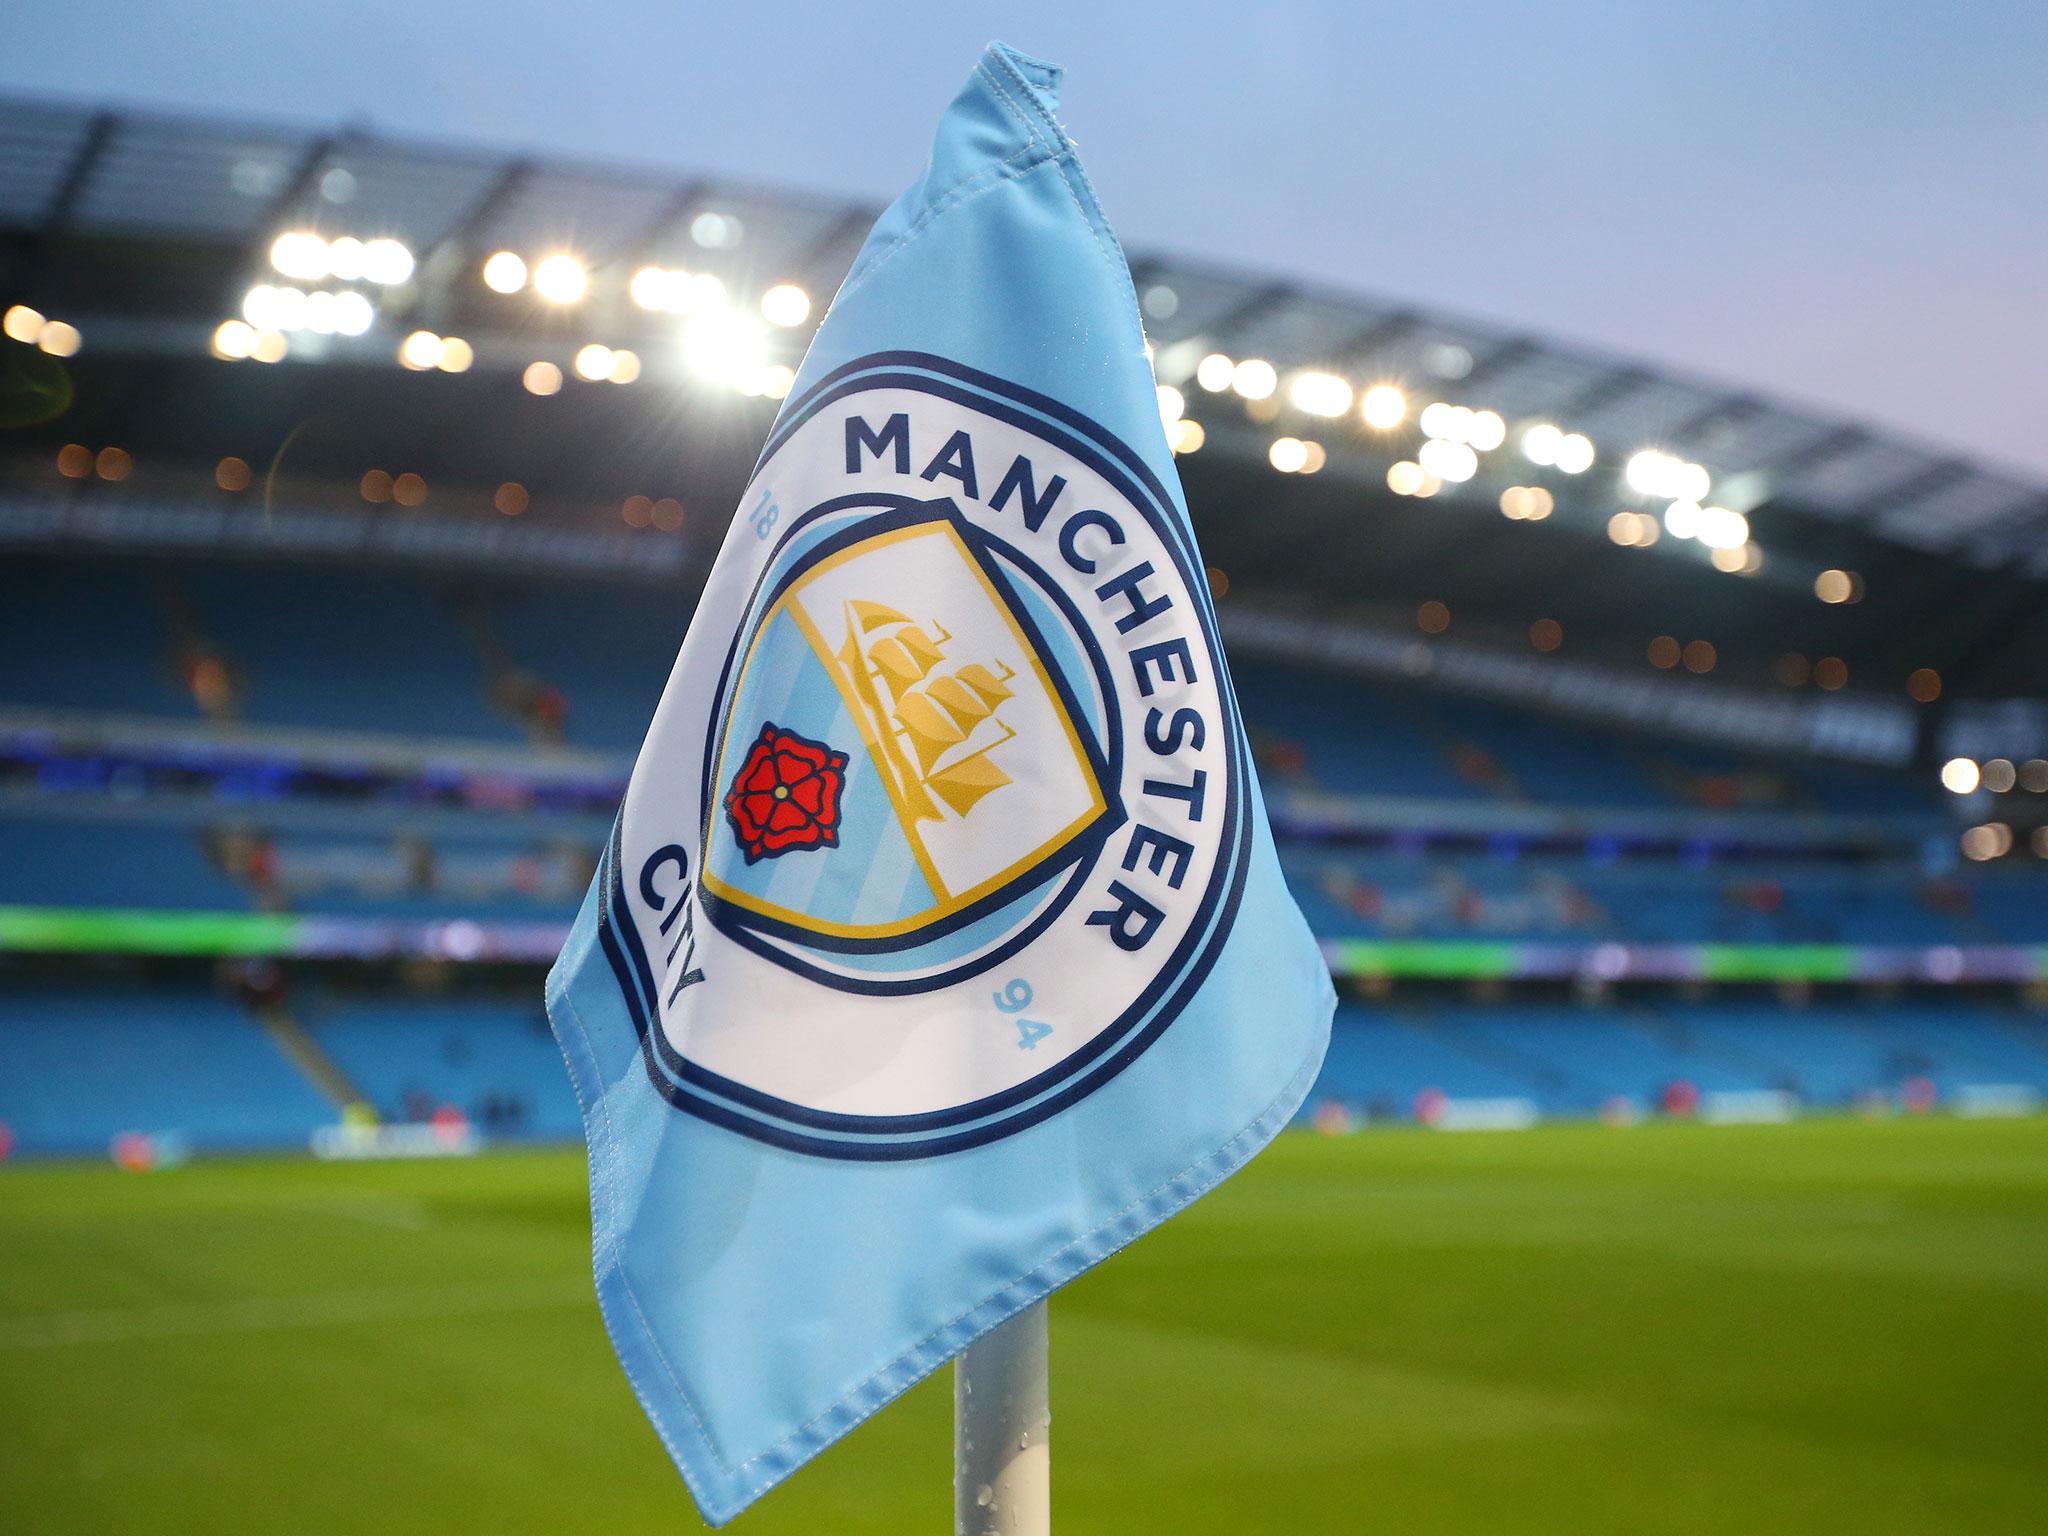 Manchester City are set to continue their global expansion